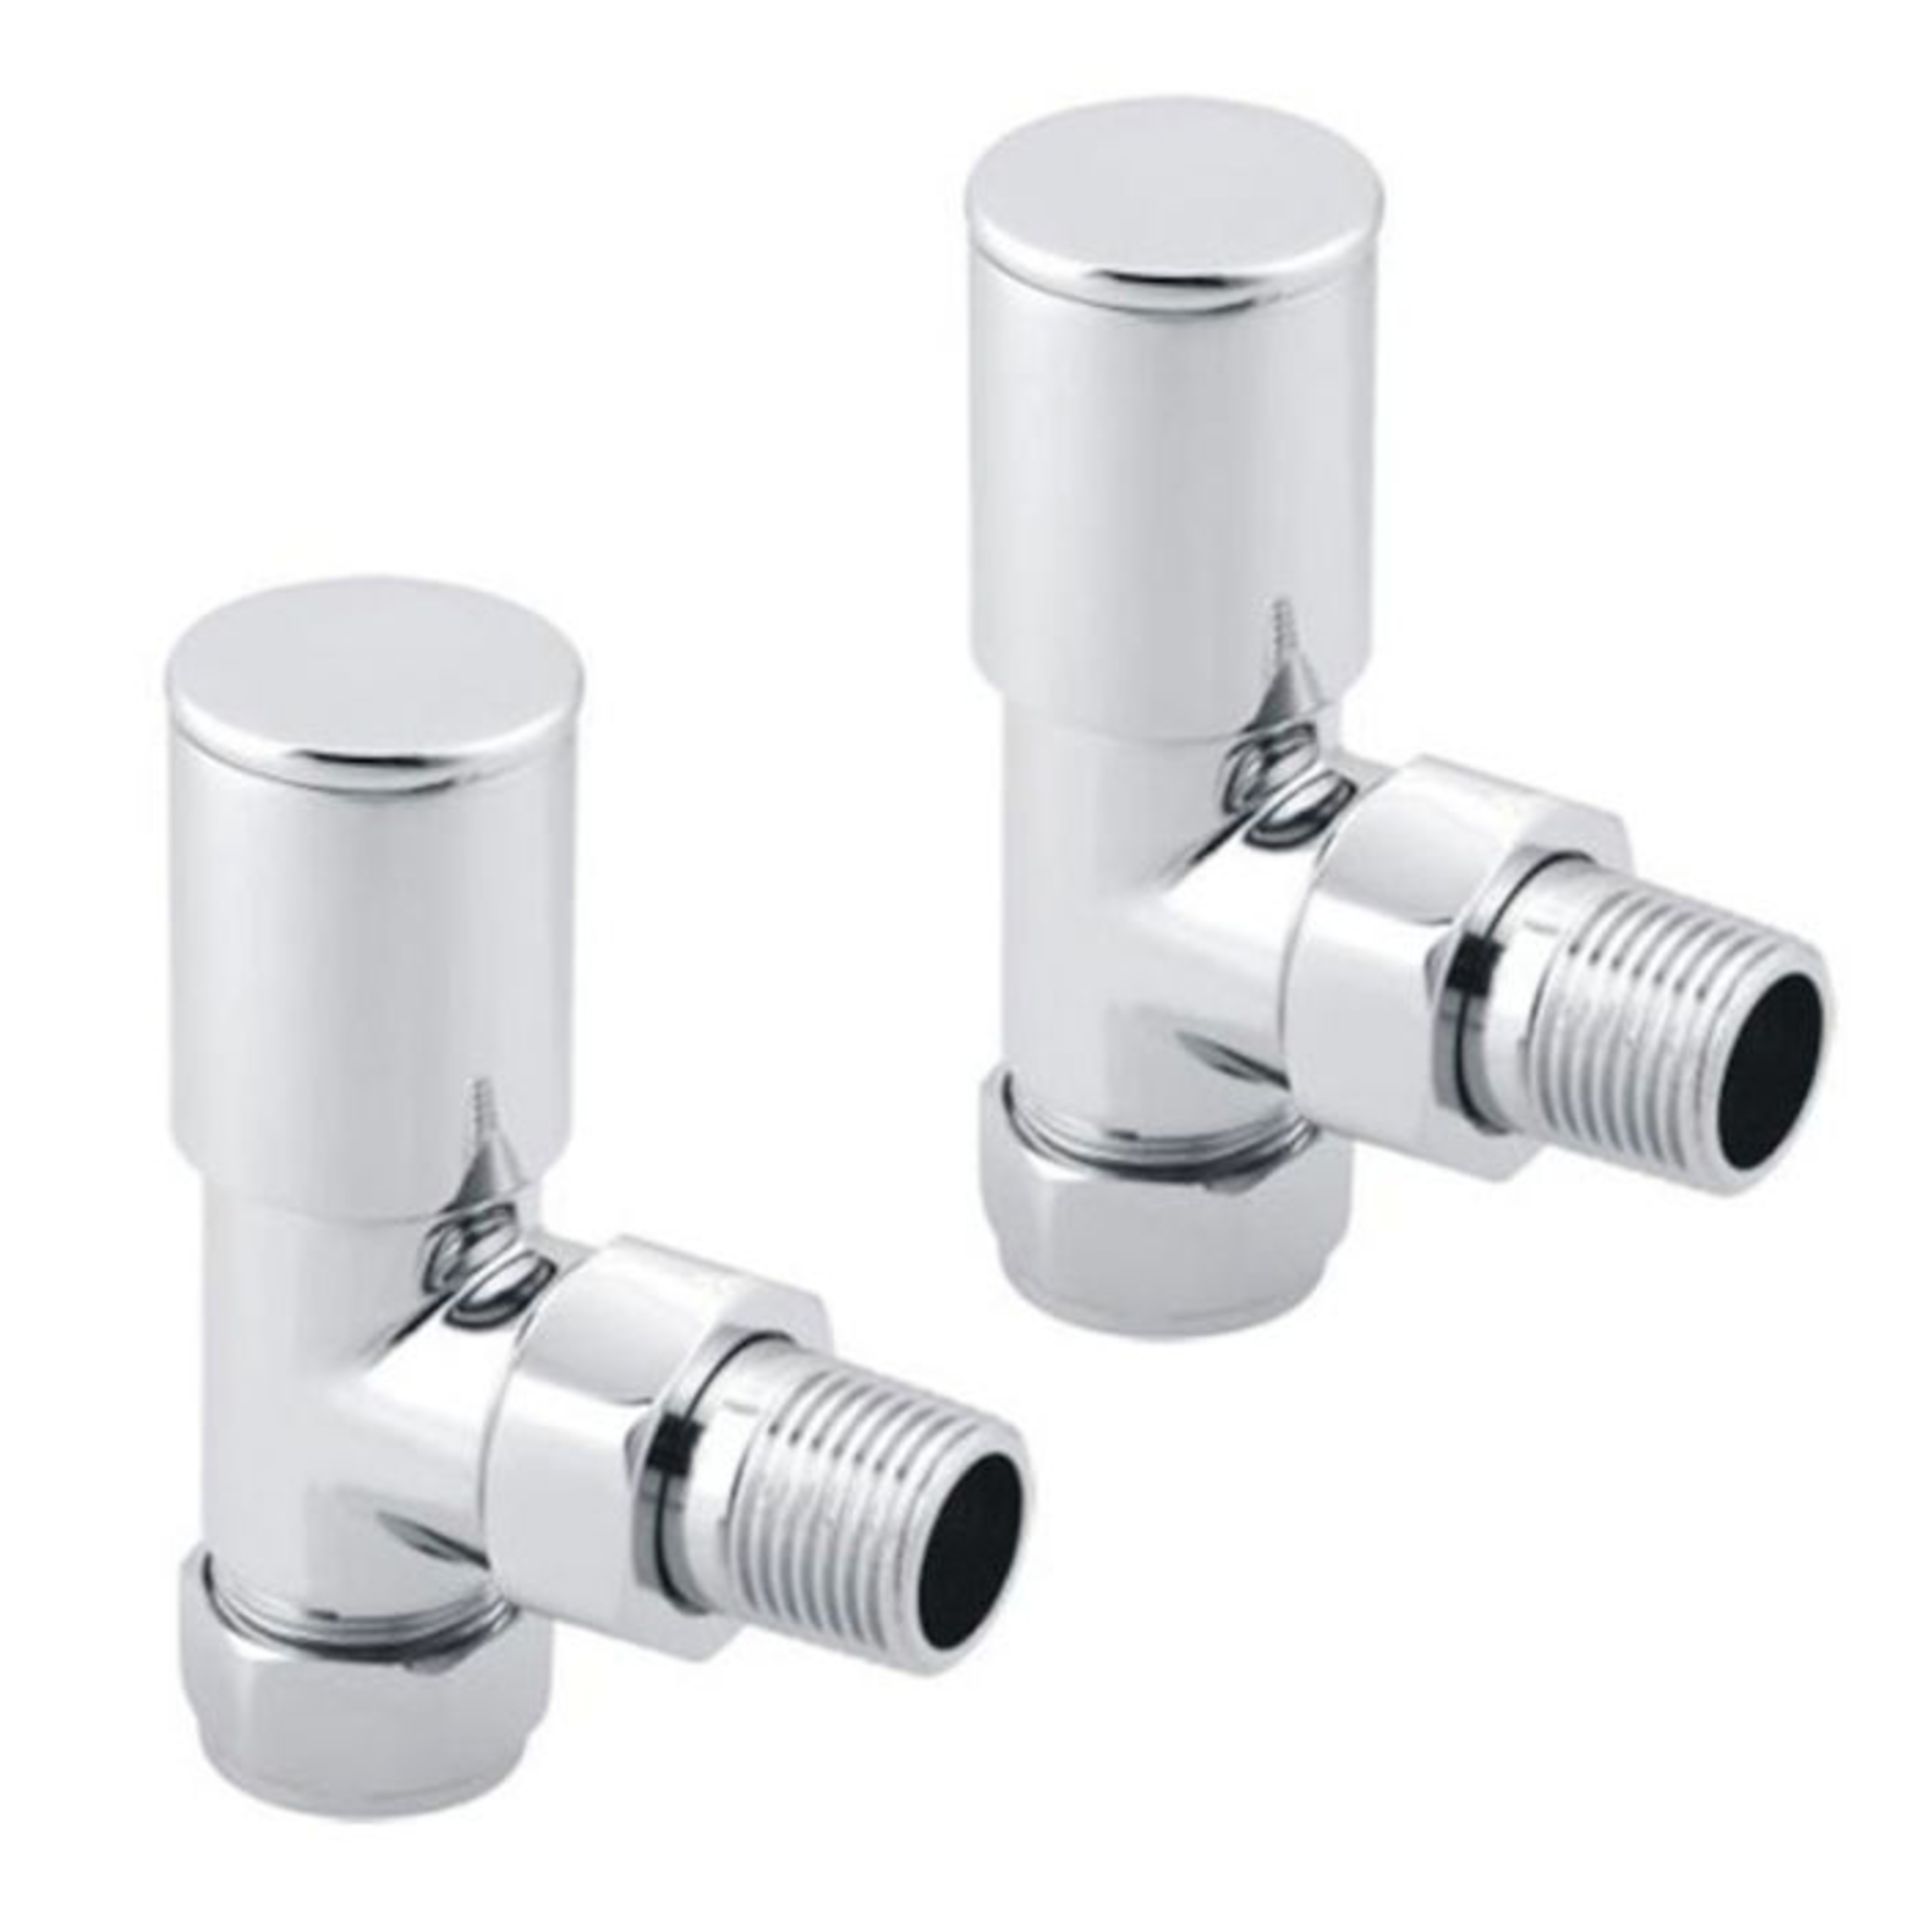 (HP204) 15mm Standard Connection Angled Radiator Valves - Heavy Duty Polished Chrome Plated Brass - Image 2 of 2